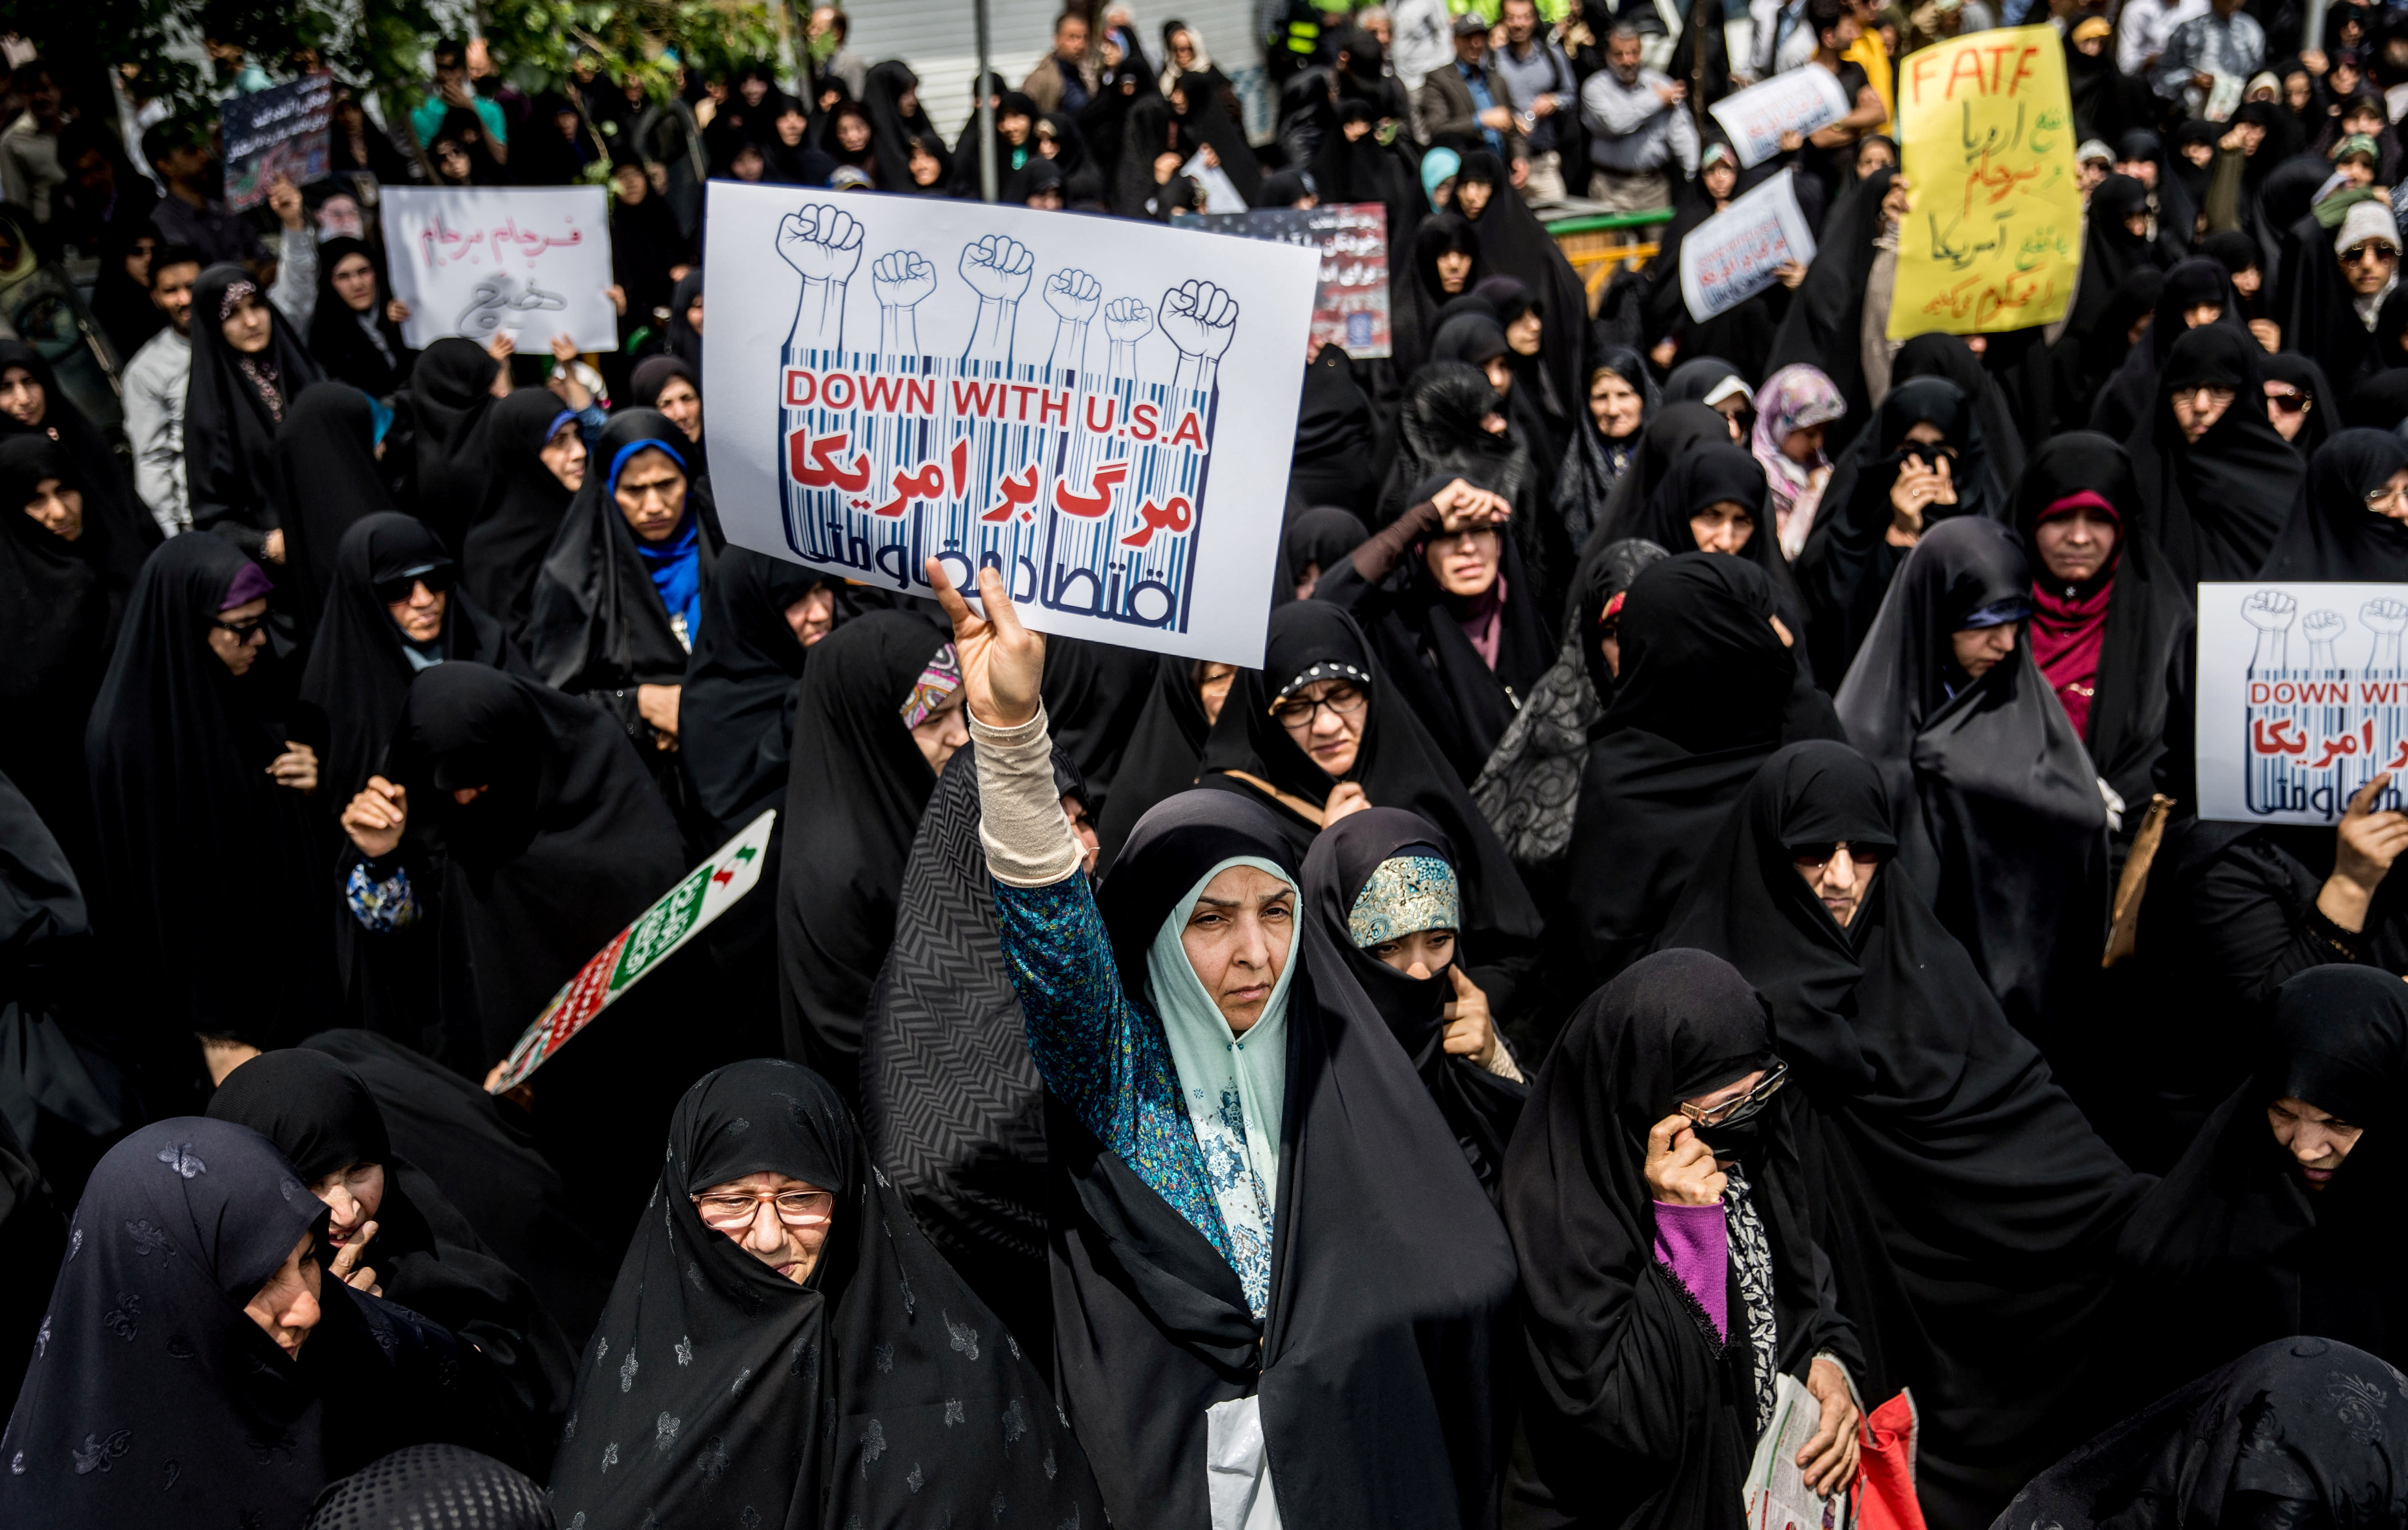 Iranian women gather during a protest against U.S. President Donald Trump's decision to walk out of a 2015 nuclear deal, in Tehran, Iran, May 11, 2018 (Reuters/Tasnim News Agency)